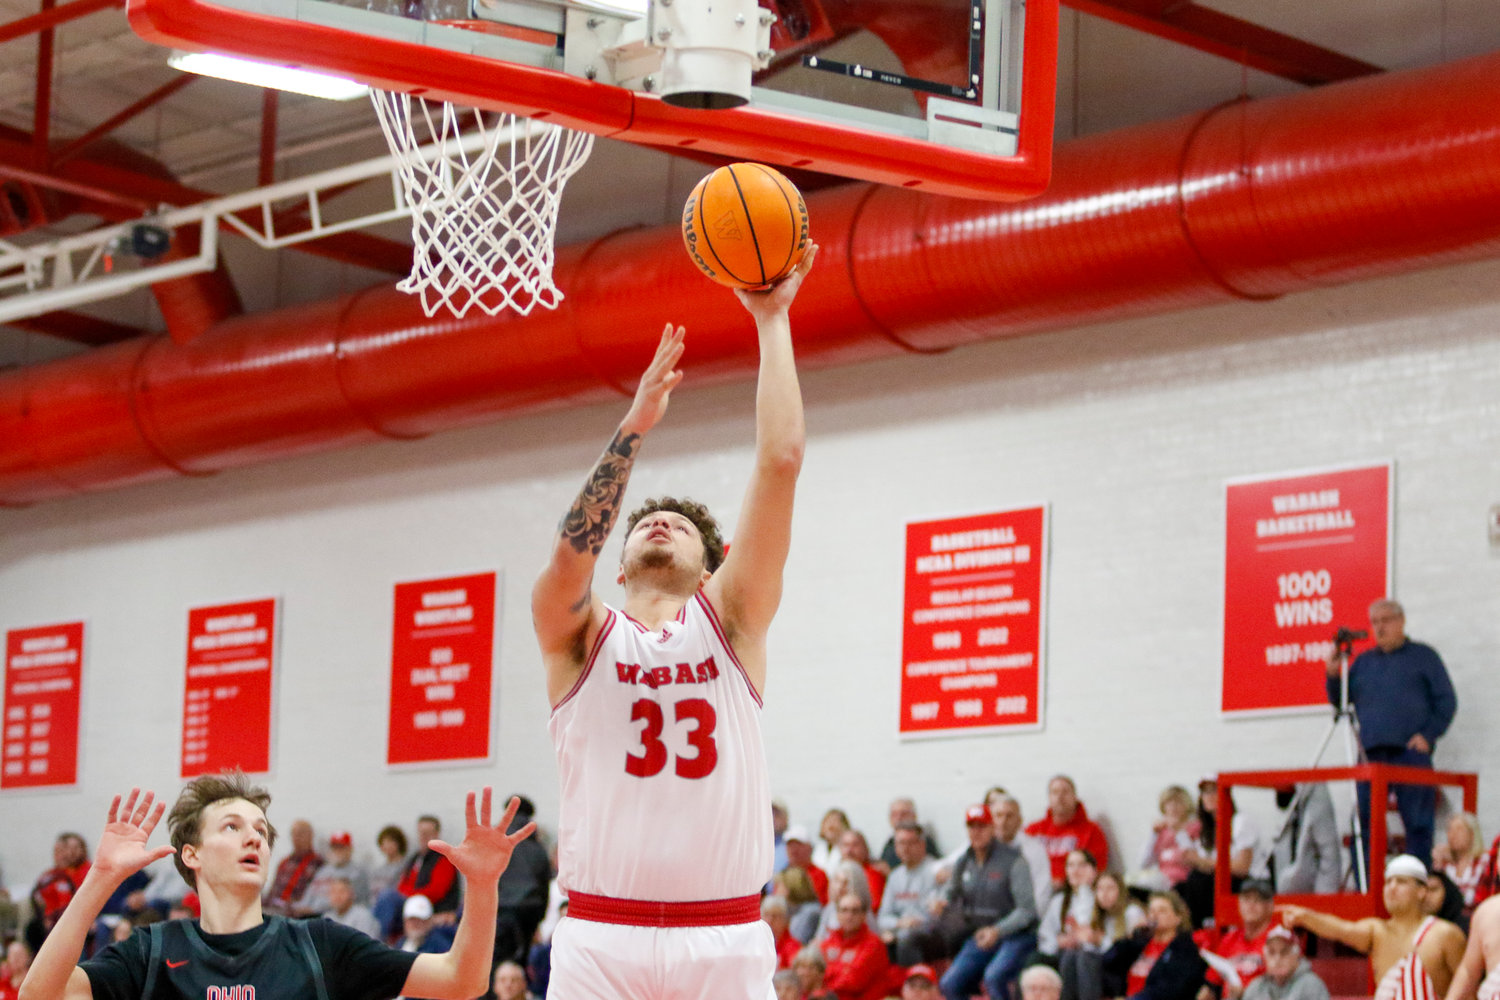 Junior Ahmoni Jones game-winning 3 with 5.6 seconds left lifted Wabash to a stunning come from behind win over Ohio Wesleyan 76-75 on Saturday at Chadwick Court.